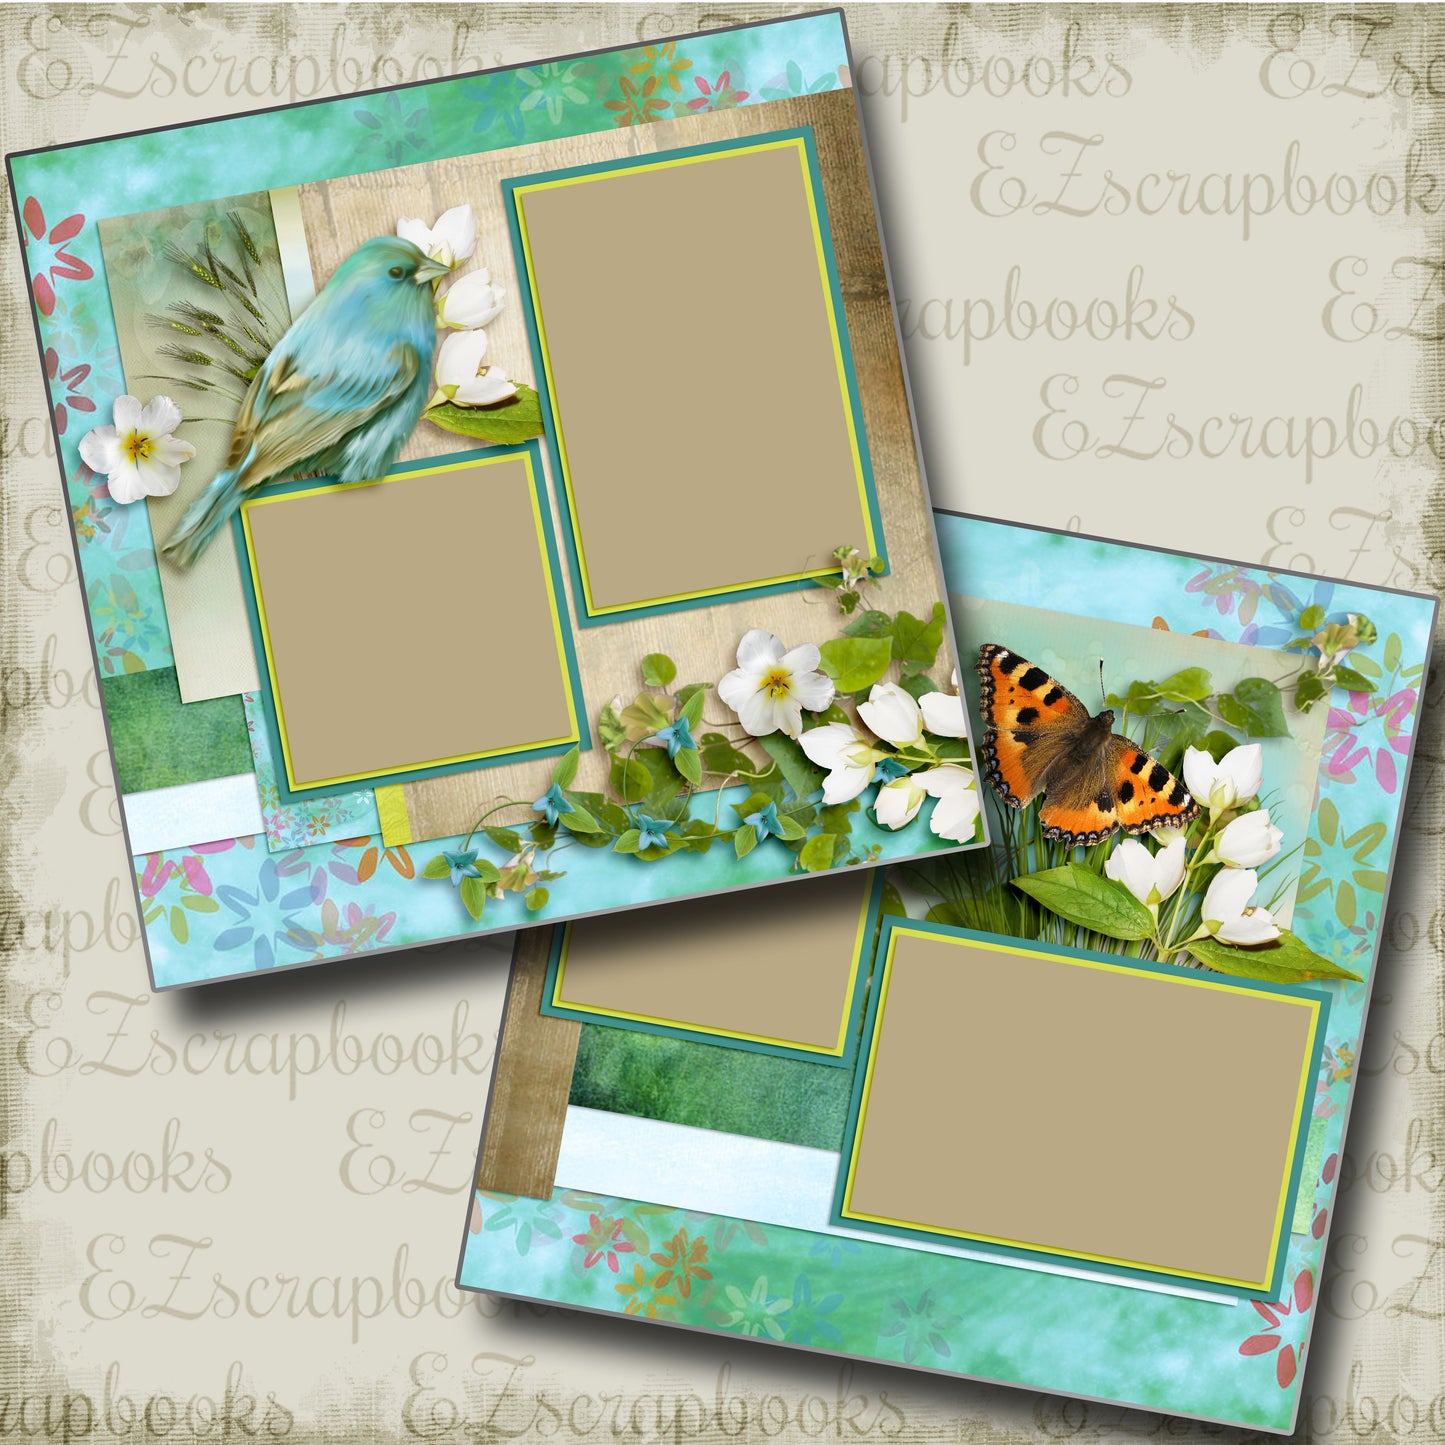 Those That Fly - 4130 - EZscrapbooks Scrapbook Layouts Farm - Garden, Spring - Easter